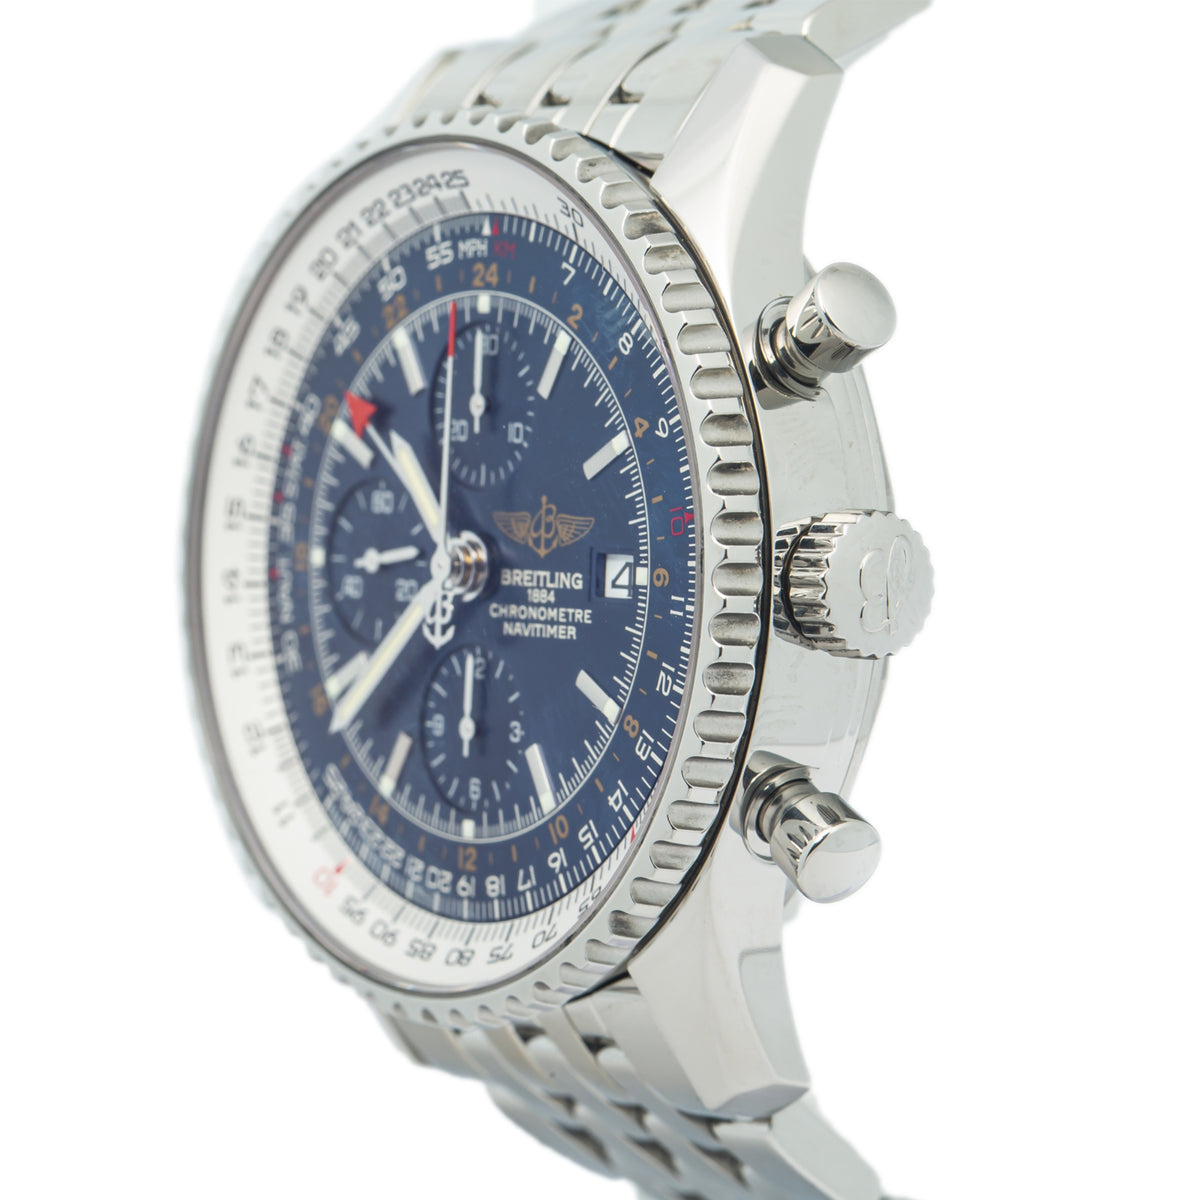 Breitling Navitimer World GMT A24322 Blue Dial Chronograph Automatic Watch 46mm